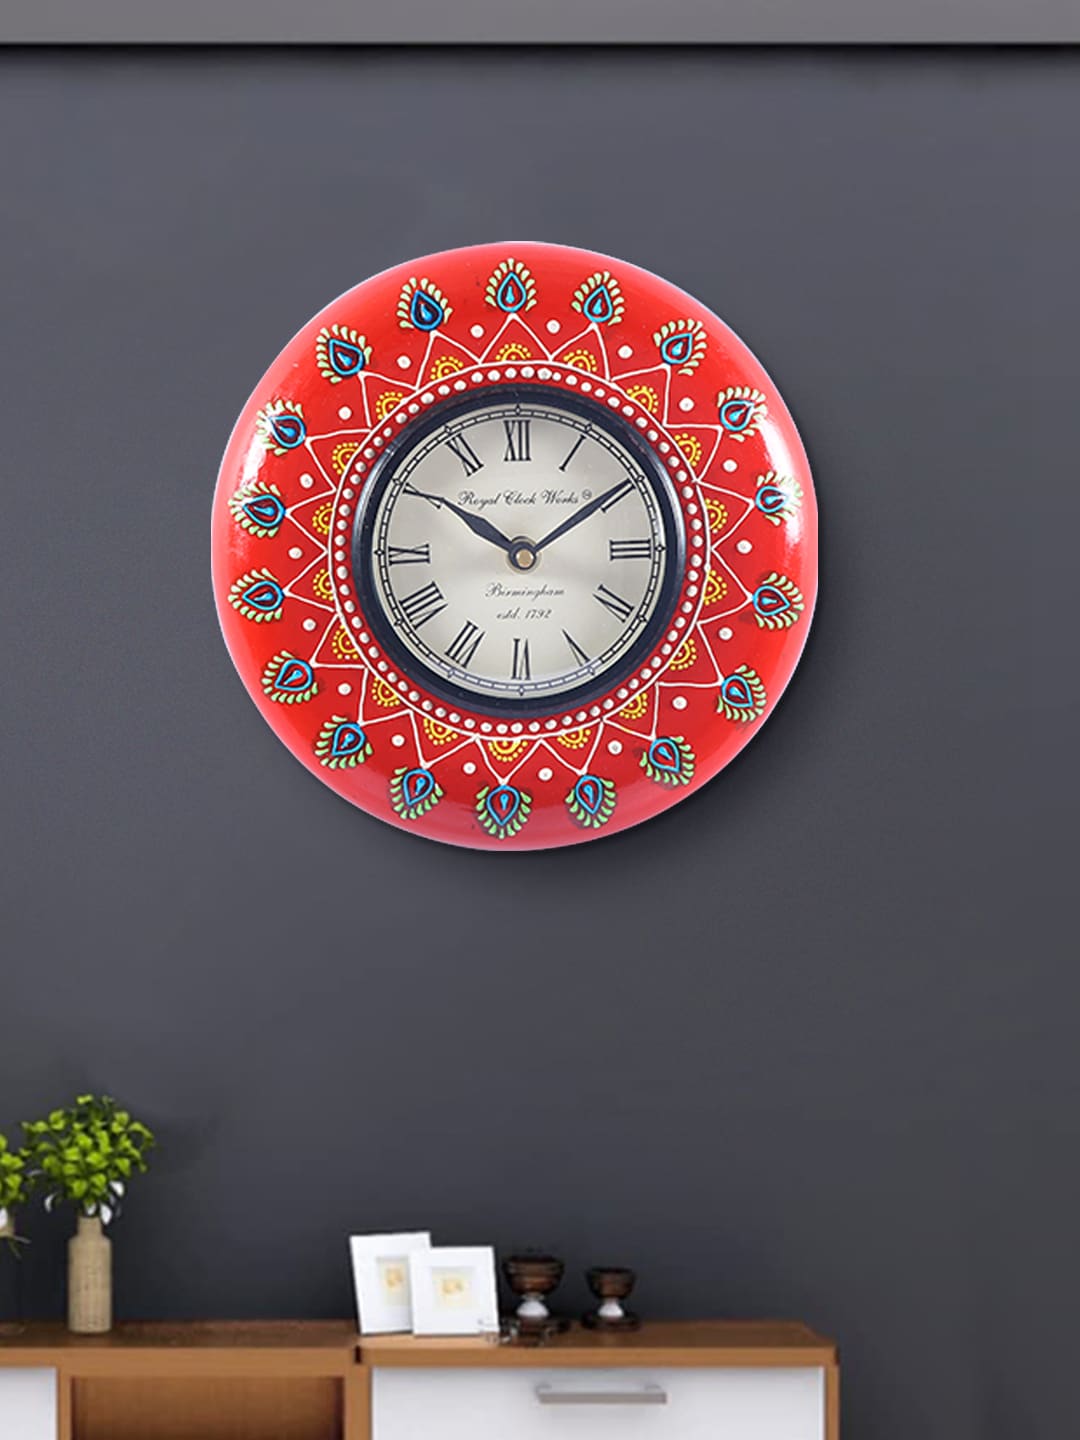 Aapno Rajasthan Red & White Textured Traditional Wall Clock Price in India